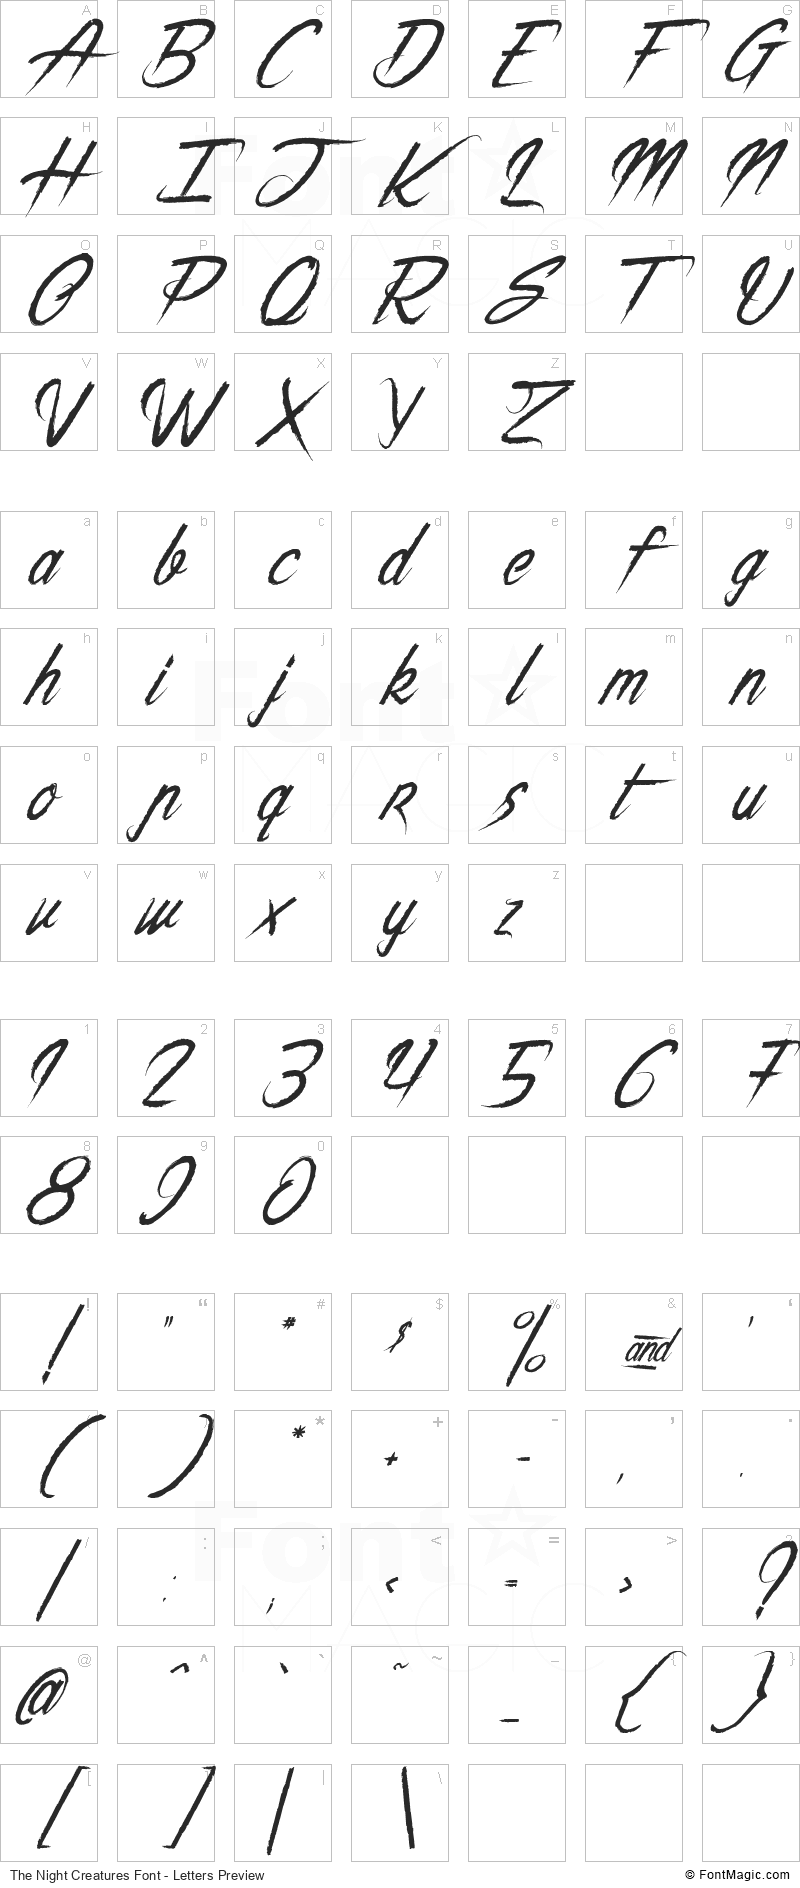 The Night Creatures Font - All Latters Preview Chart